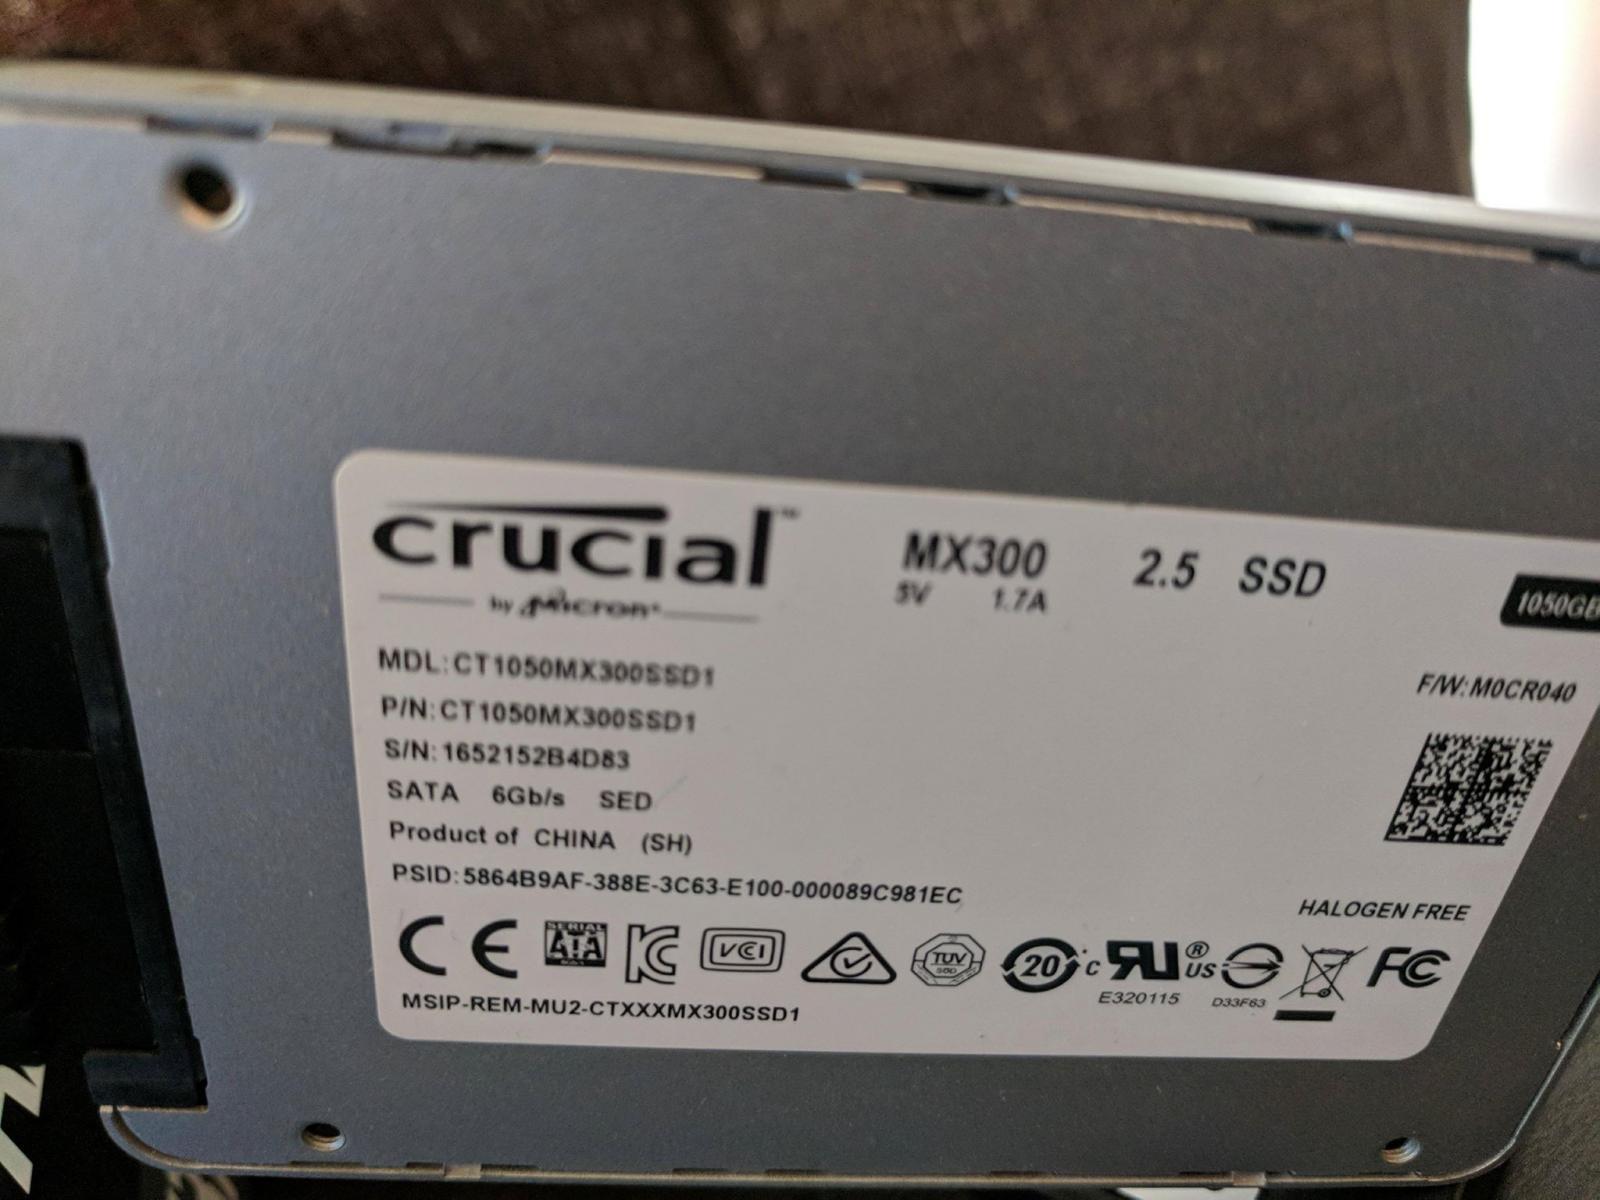 For sale Crucial MX300 1.1TB SSD